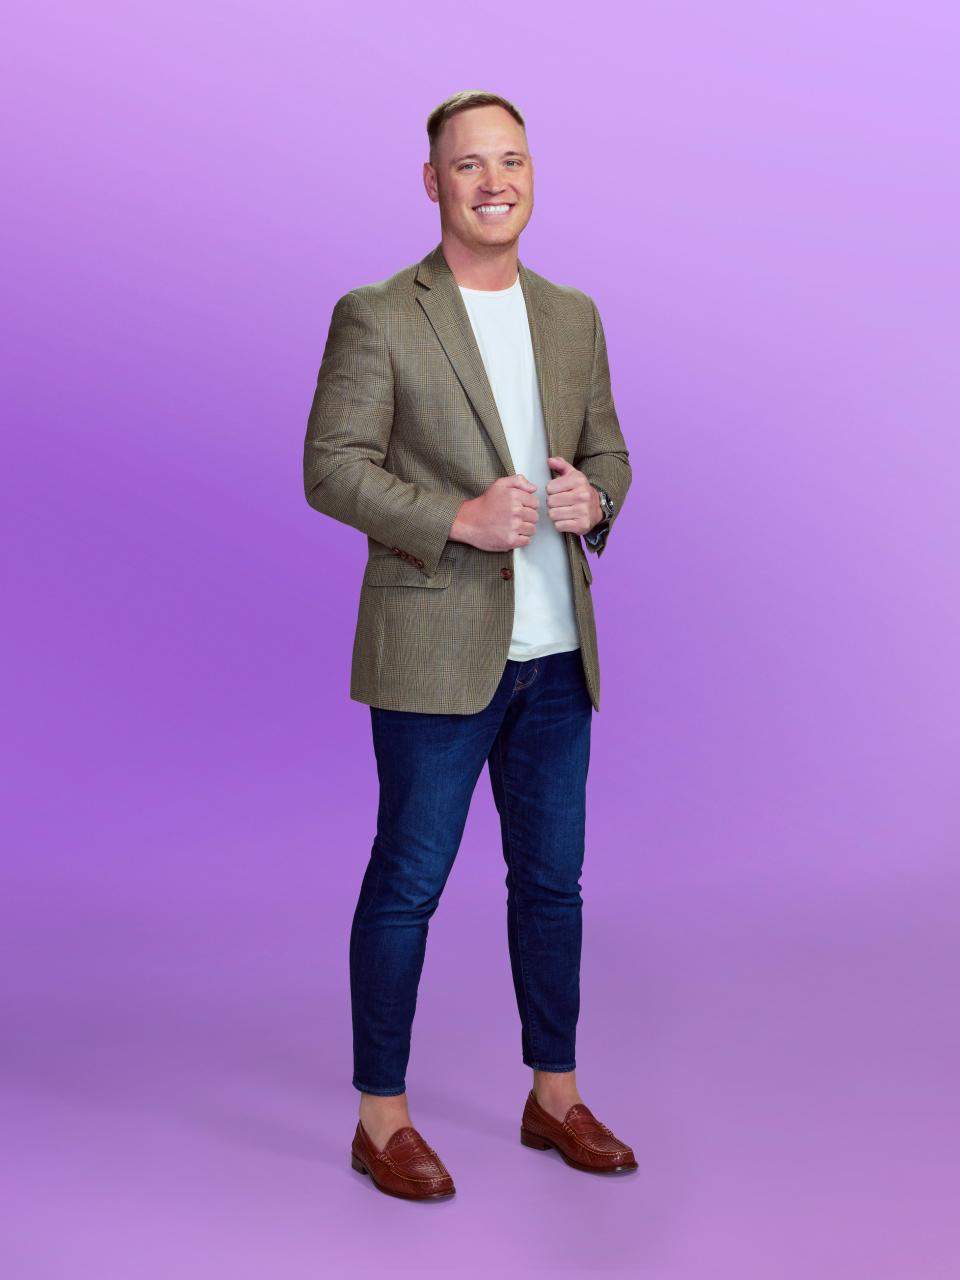 Jimmy, a contestant on "Love Is Blind" season 6, wearing a beige jacket and jeans